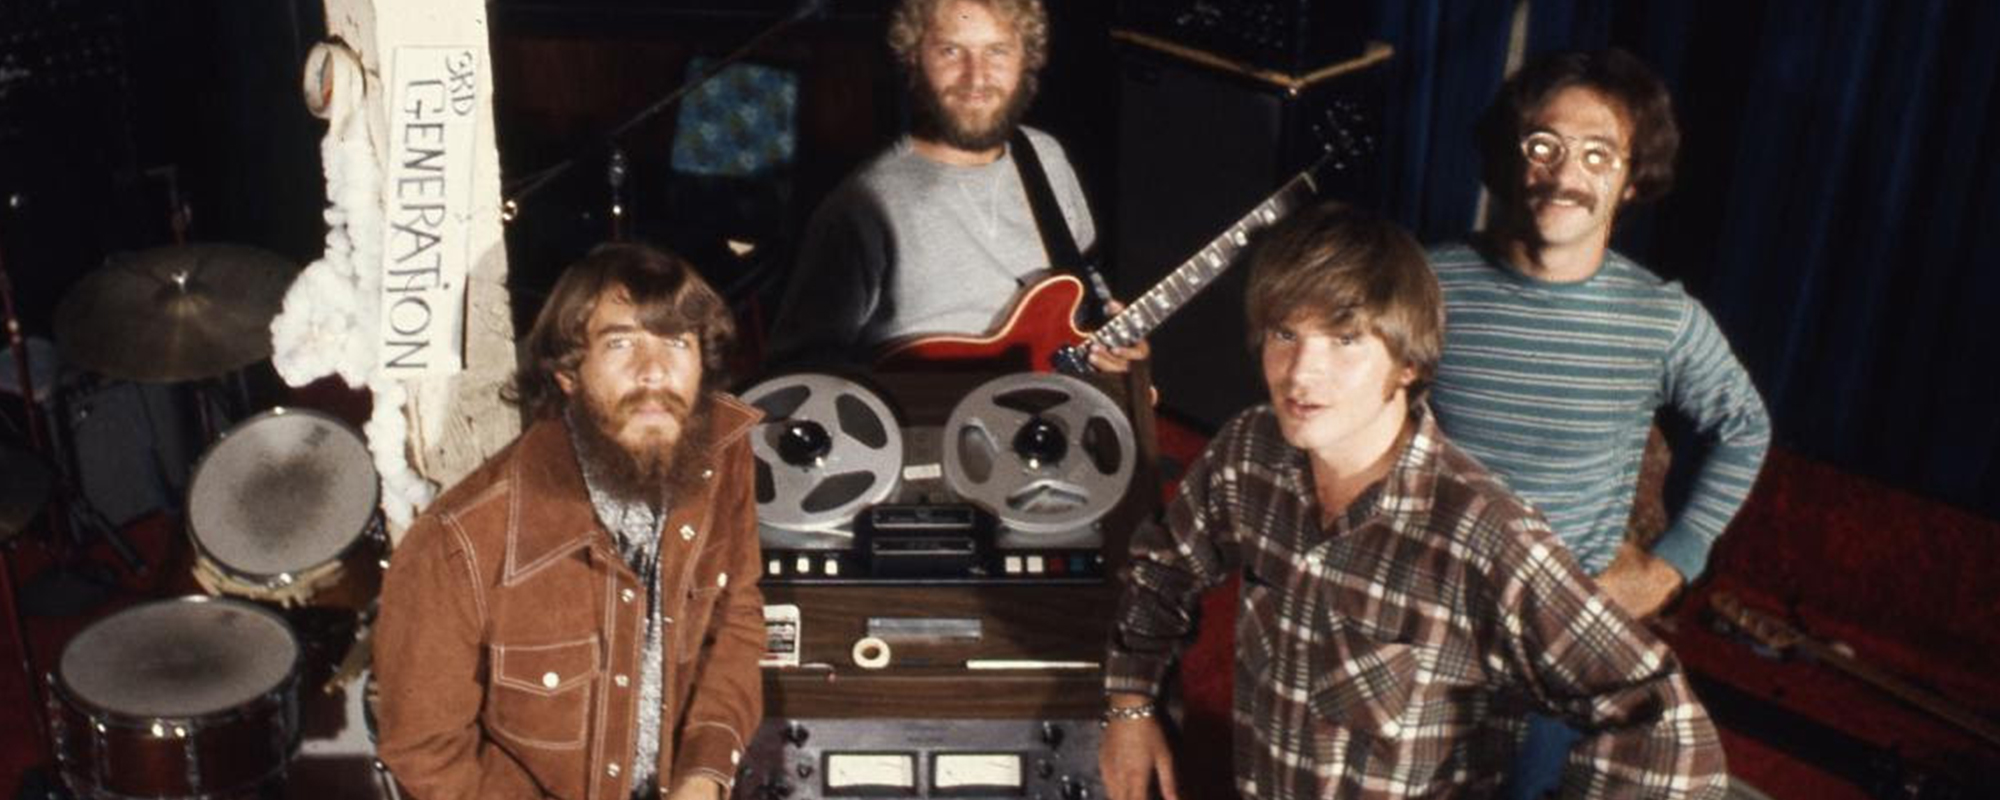 Creedence Clearwater Revival Revamps Their Hit Single “Travelin’ Band” With New Music Video